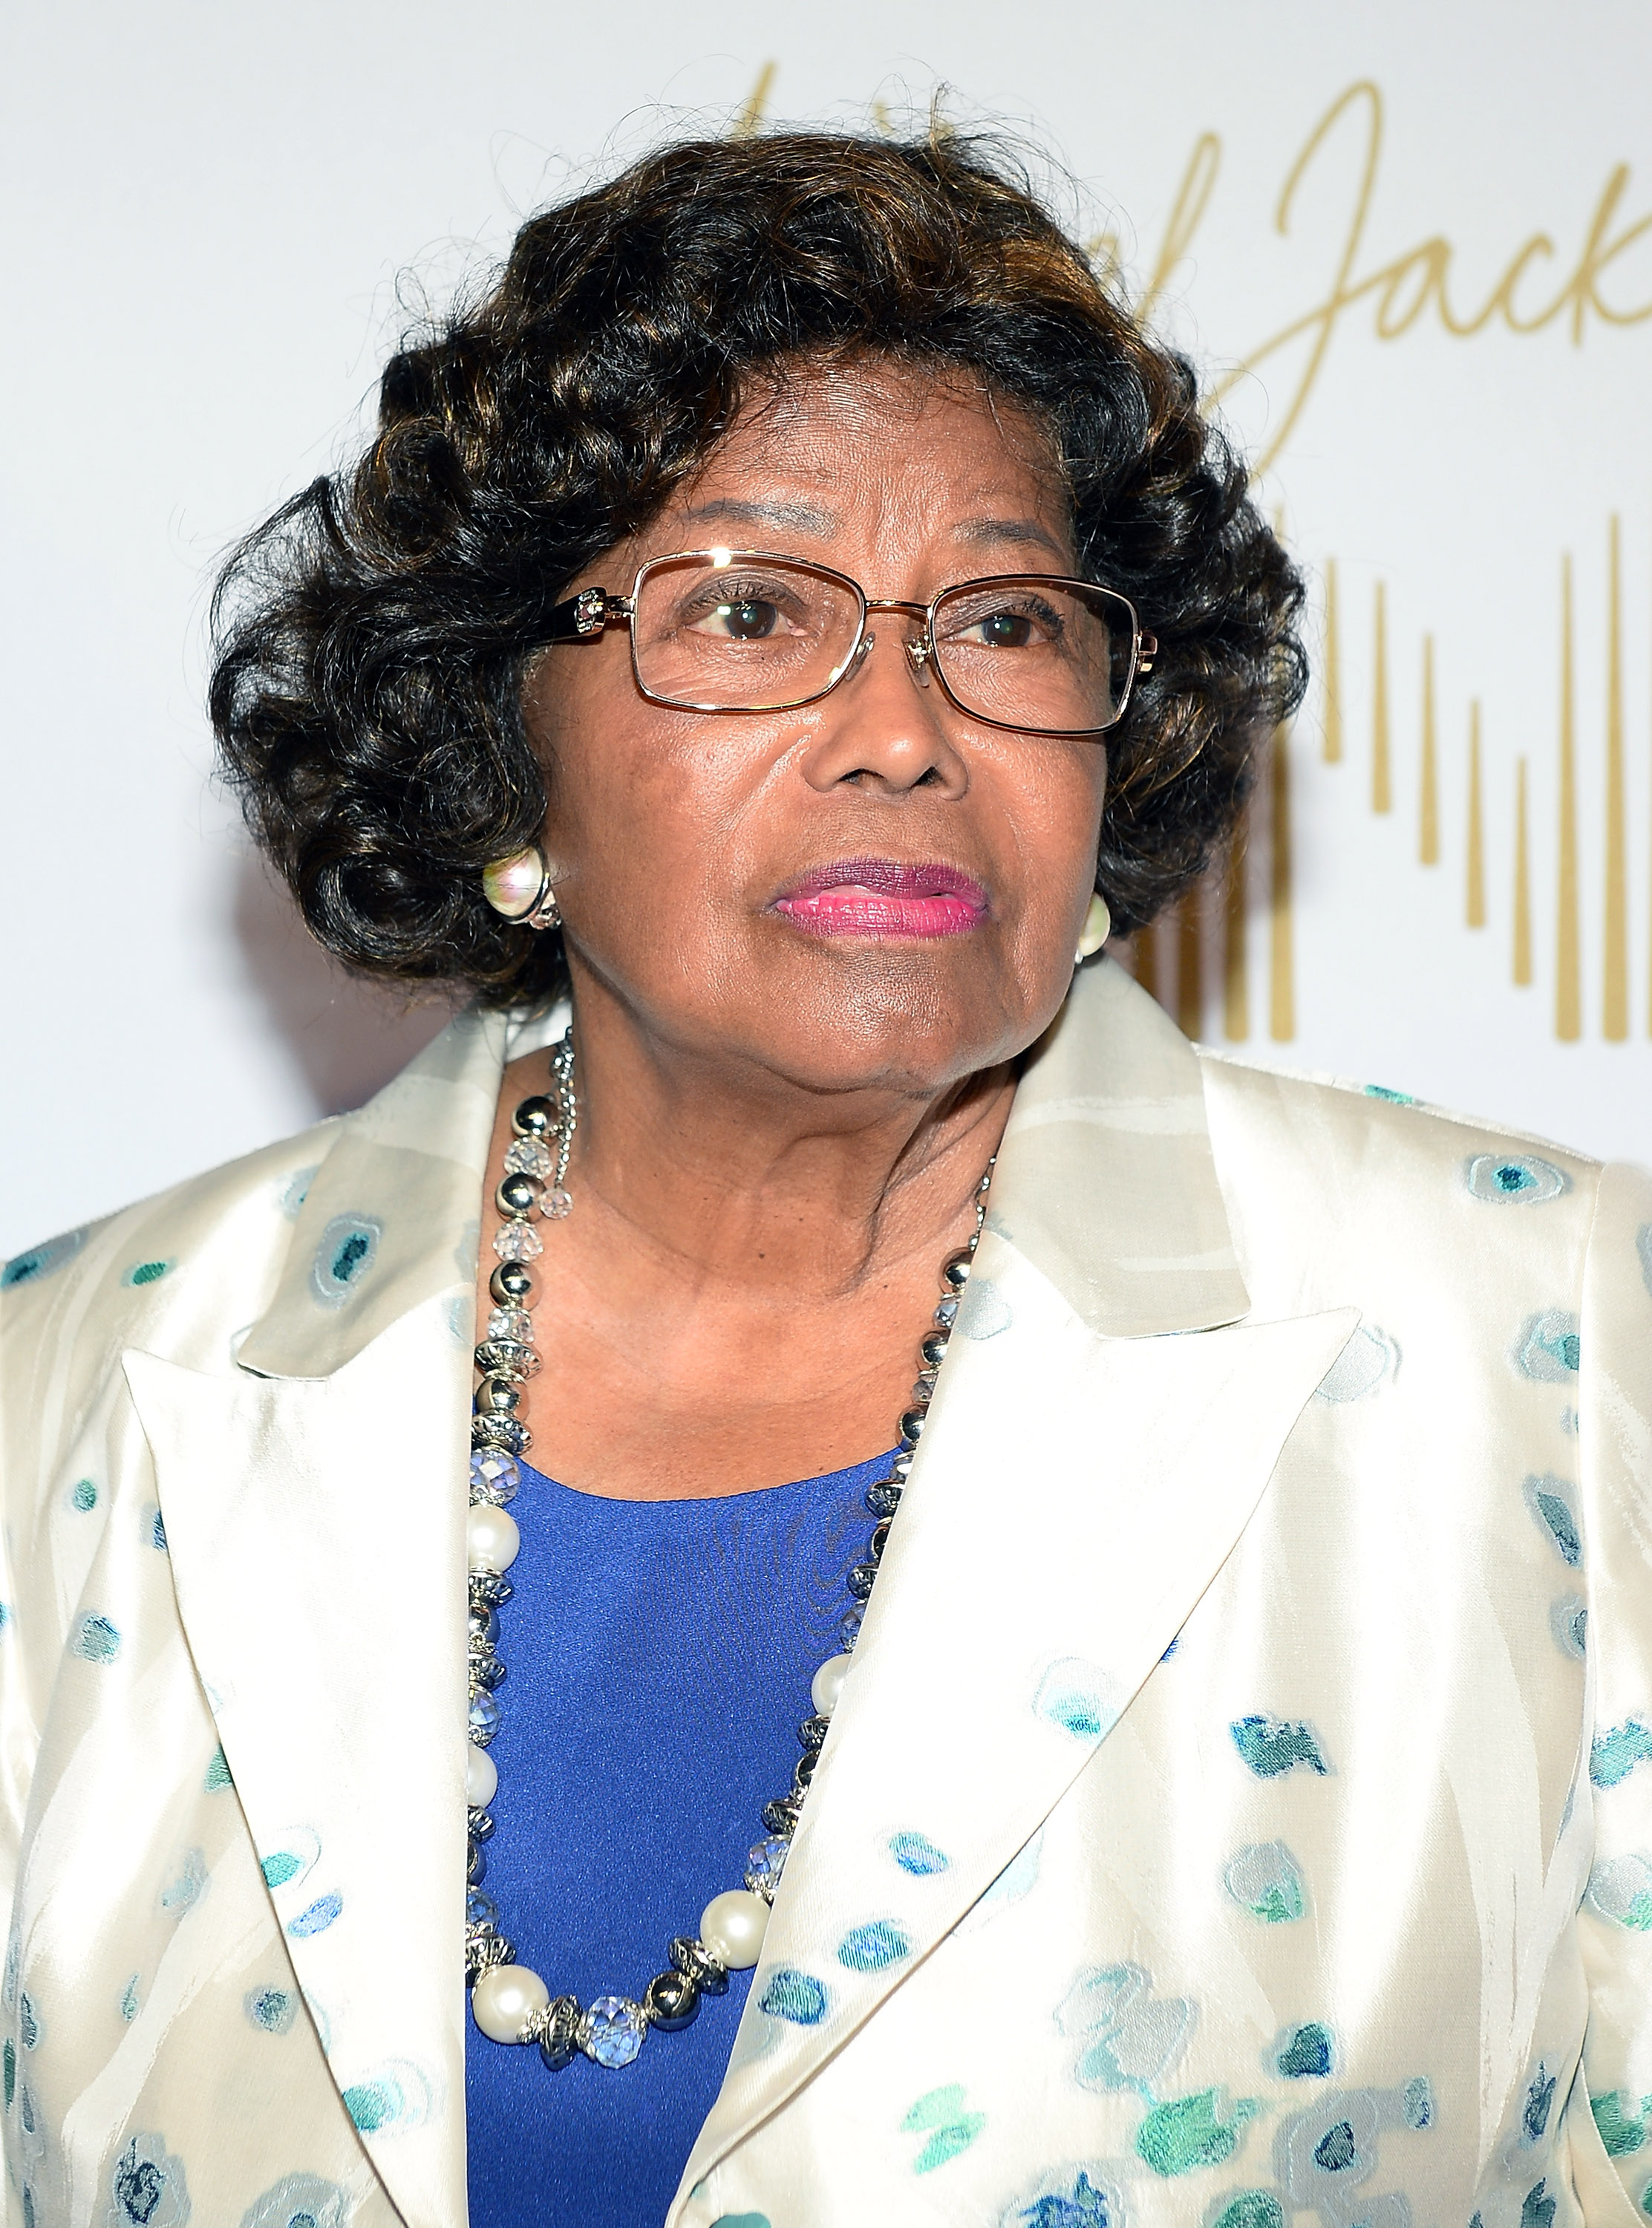 Katherine Jackson at the world premiere of "Michael Jackson ONE by Cirque du Soleil" on June 29, 2013, in Las Vegas, Nevada. | Source: Getty Images